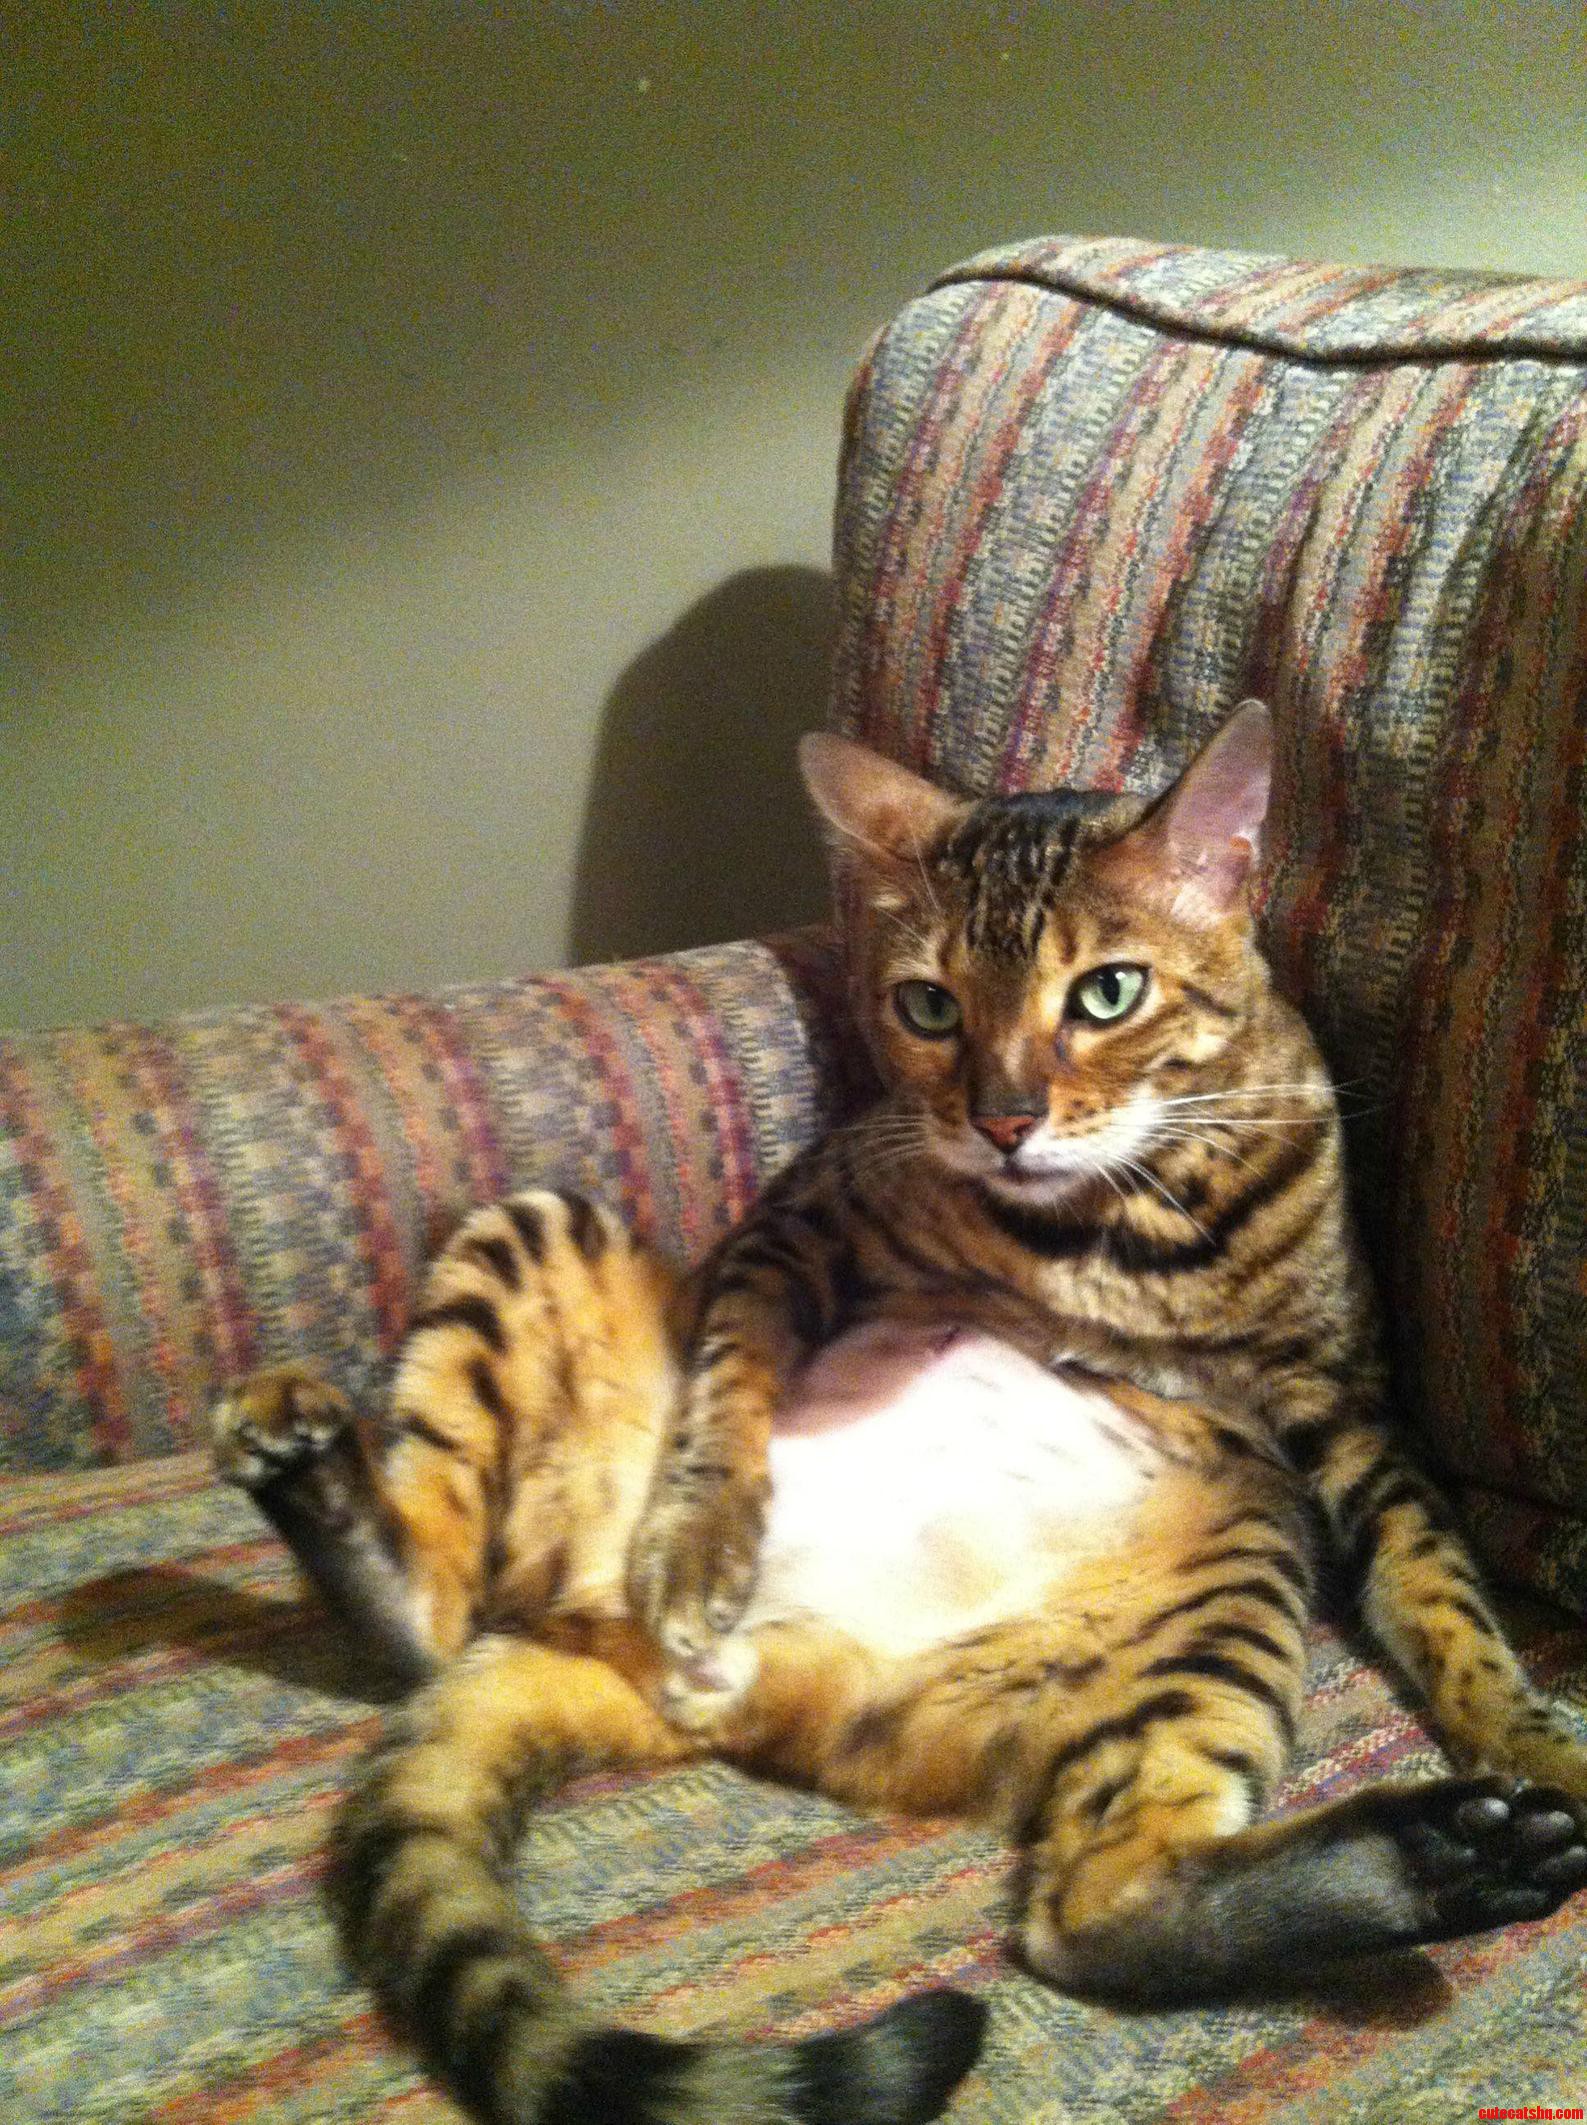 Our Friend S Bengal Biscuits.